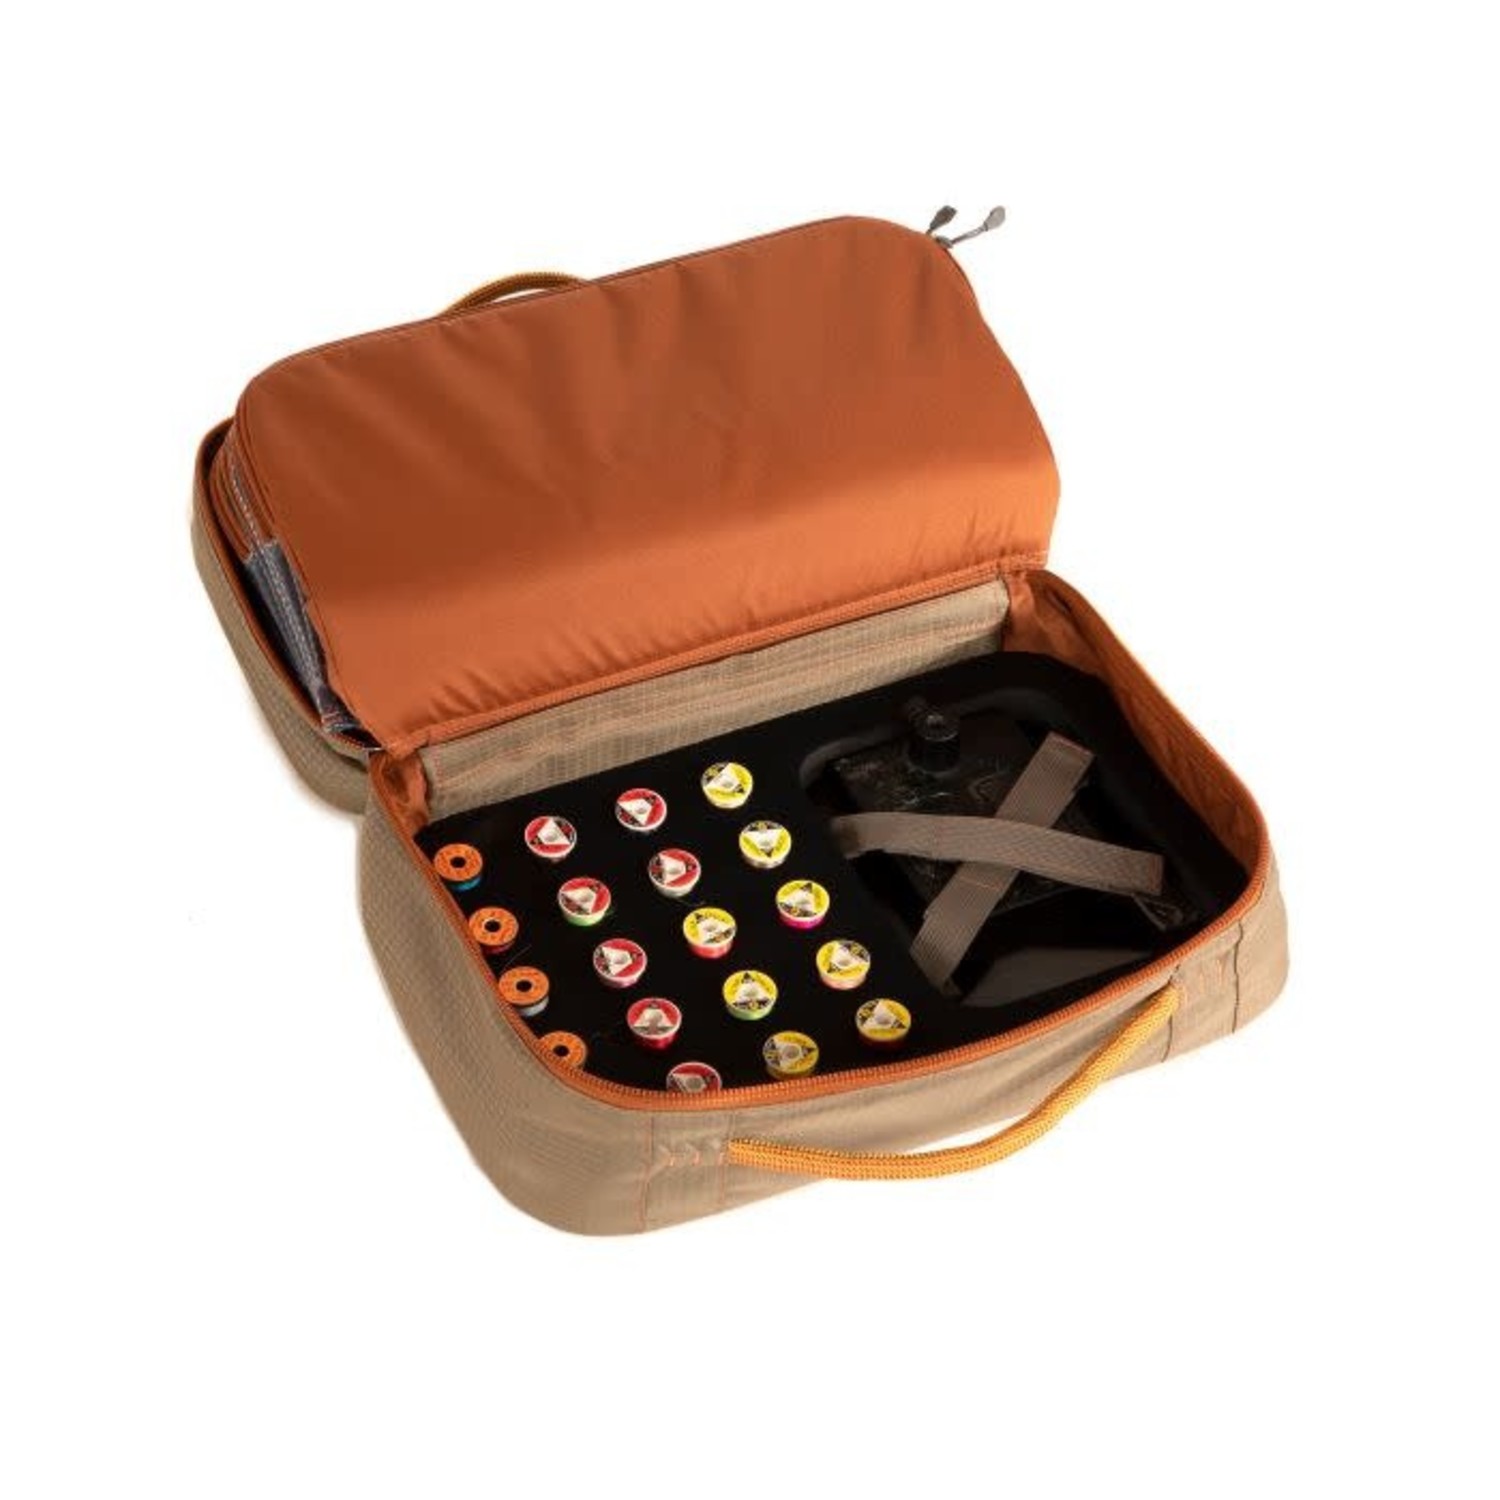 Fishpond Tailwater Fly Tying Kit - Royal Treatment Fly Fishing